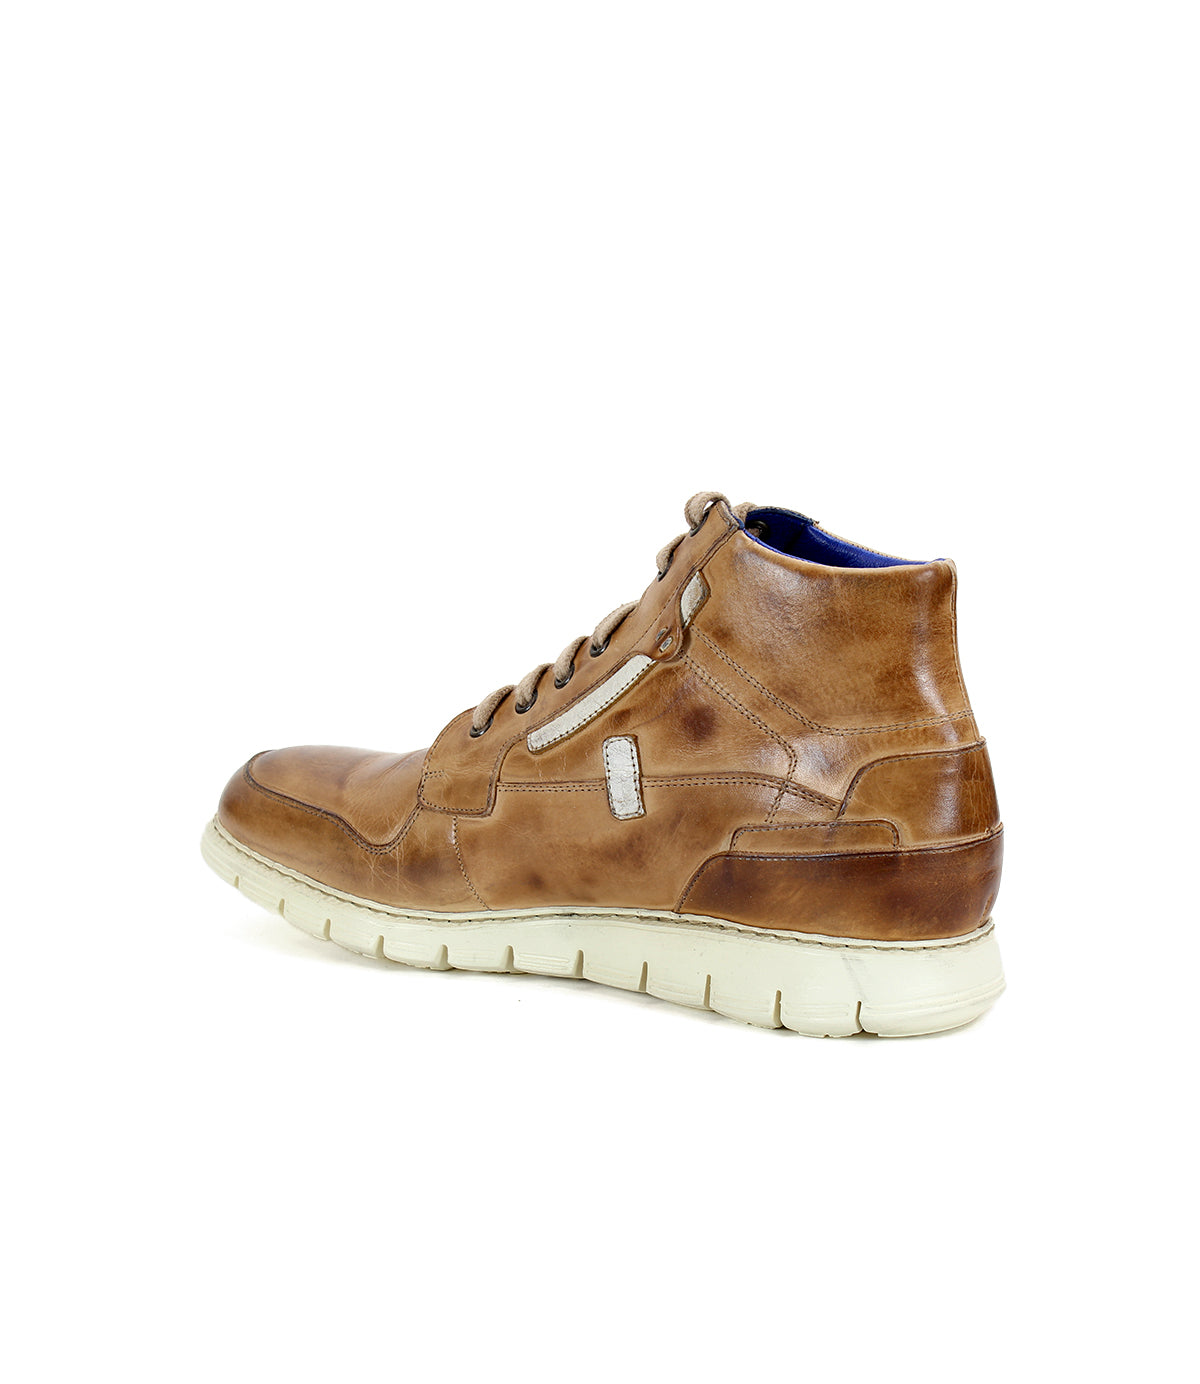 A men's tan leather sneaker with a comfortable insole and lightweight outsole, the Bed Stu Galahad.